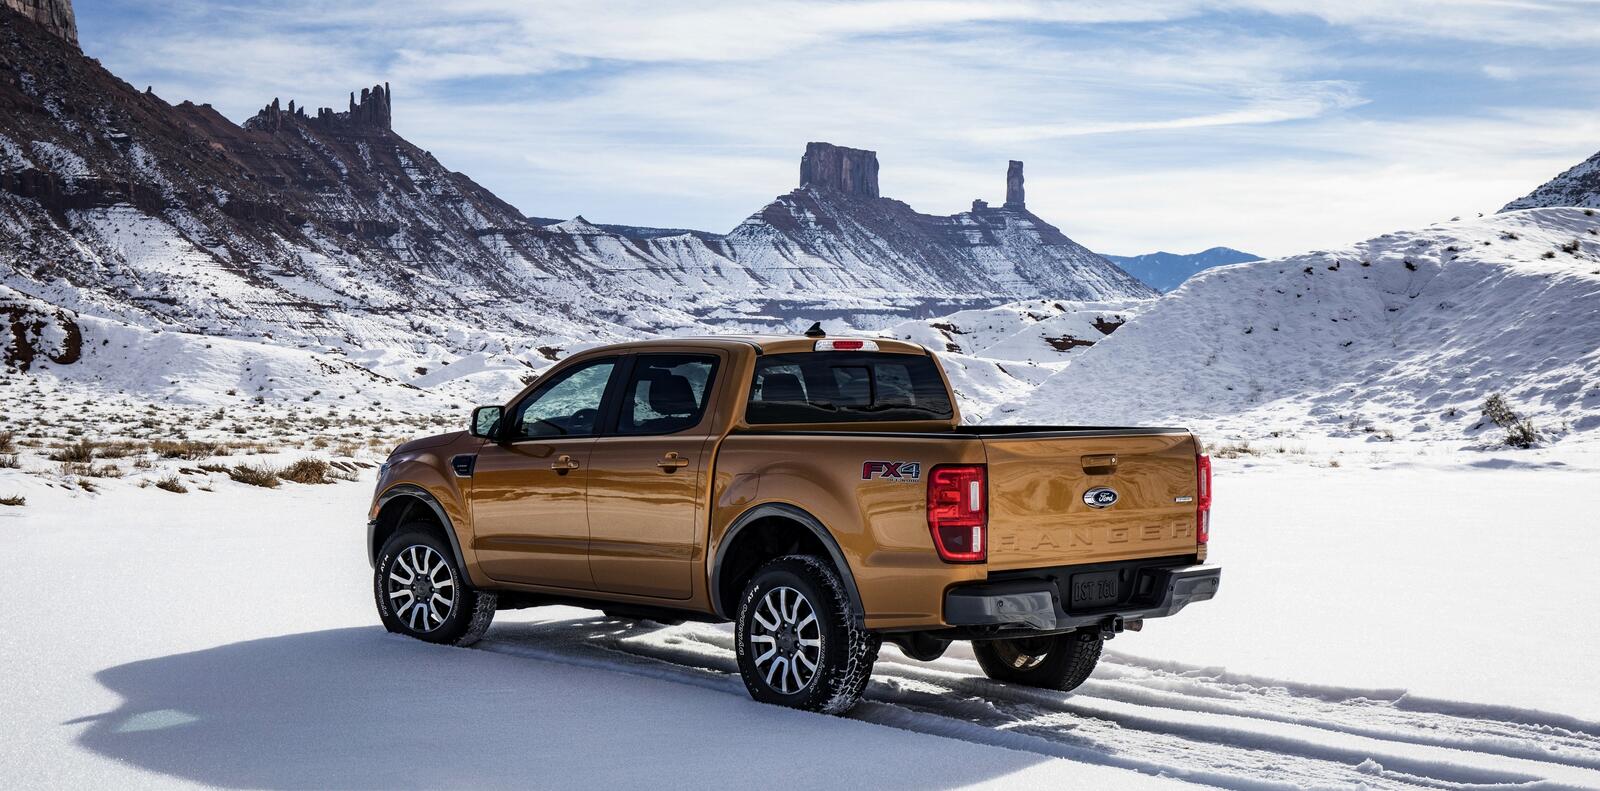 Free photo Ford Ranger pickup truck in winter weather